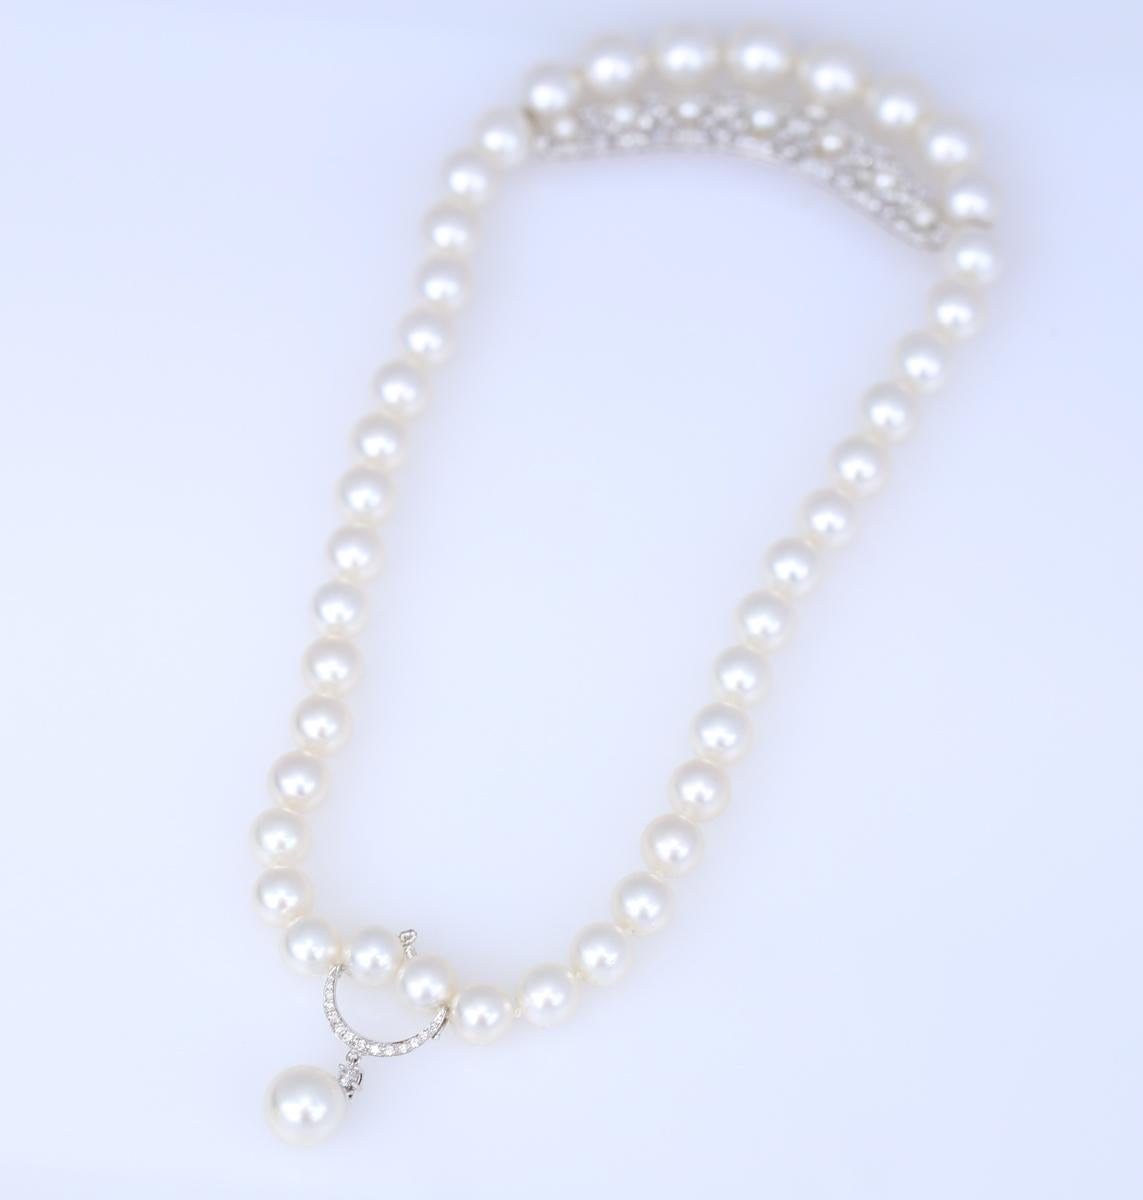 Pearls Diamonds 2.5 Carat Necklace AAA Quality, 2020 For Sale 10